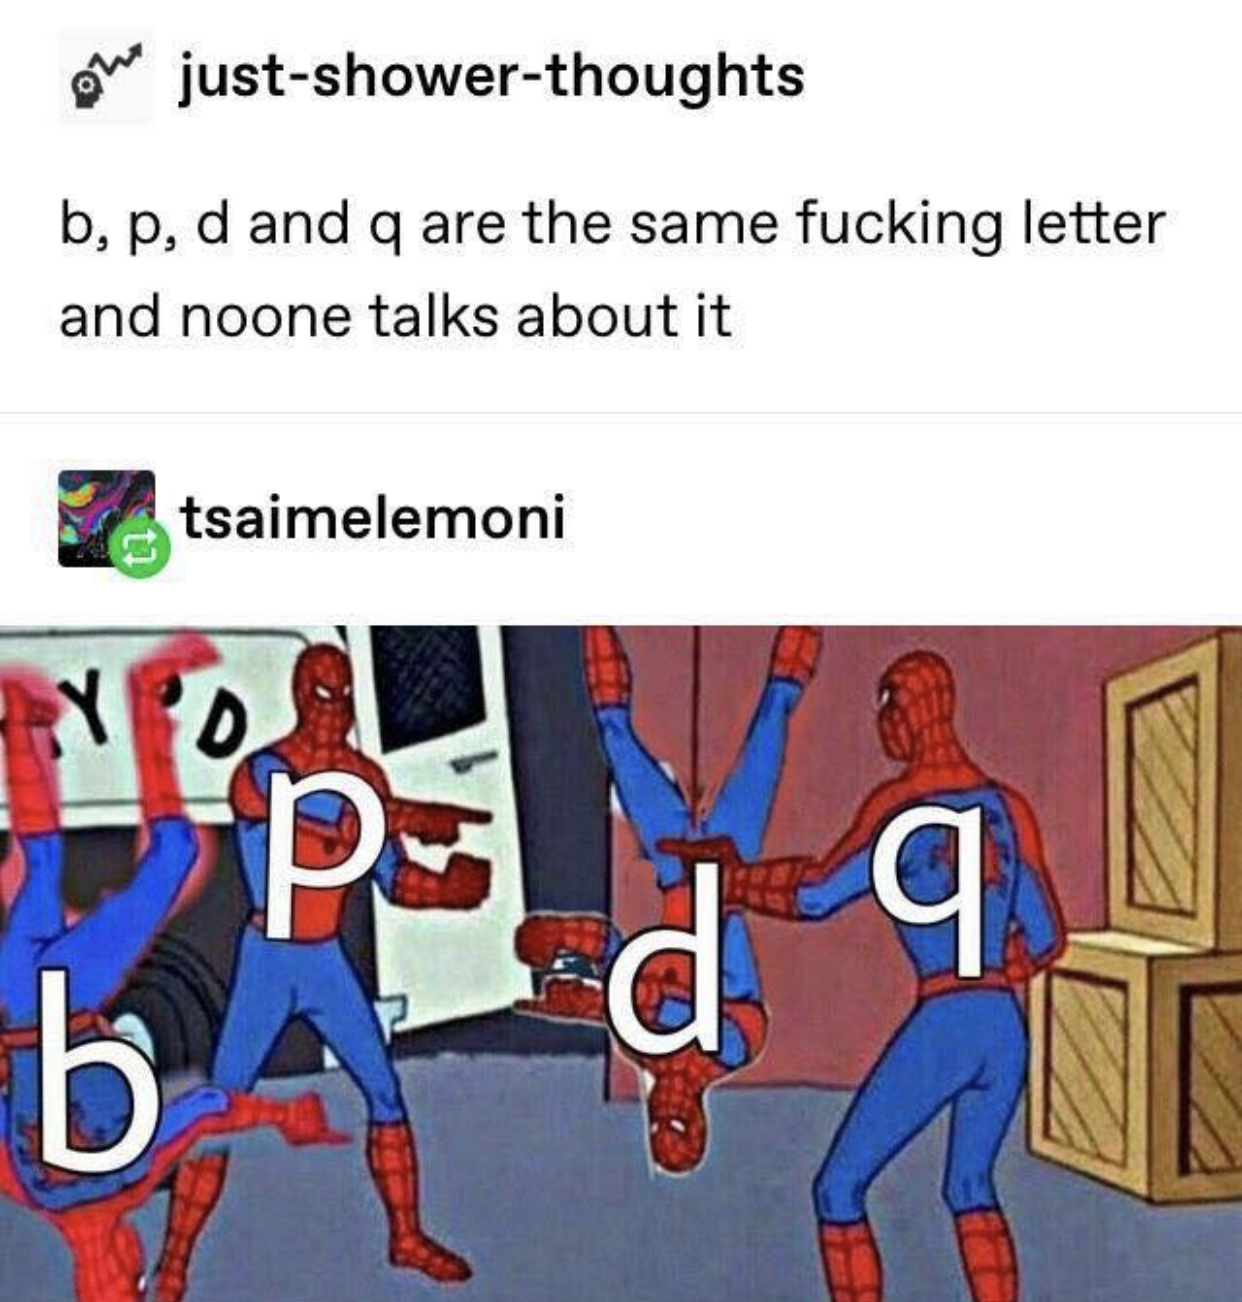 asian letters look the same - on justshowerthoughts b, p, d and q are the same fucking letter and noone talks about it tsaimelemoni